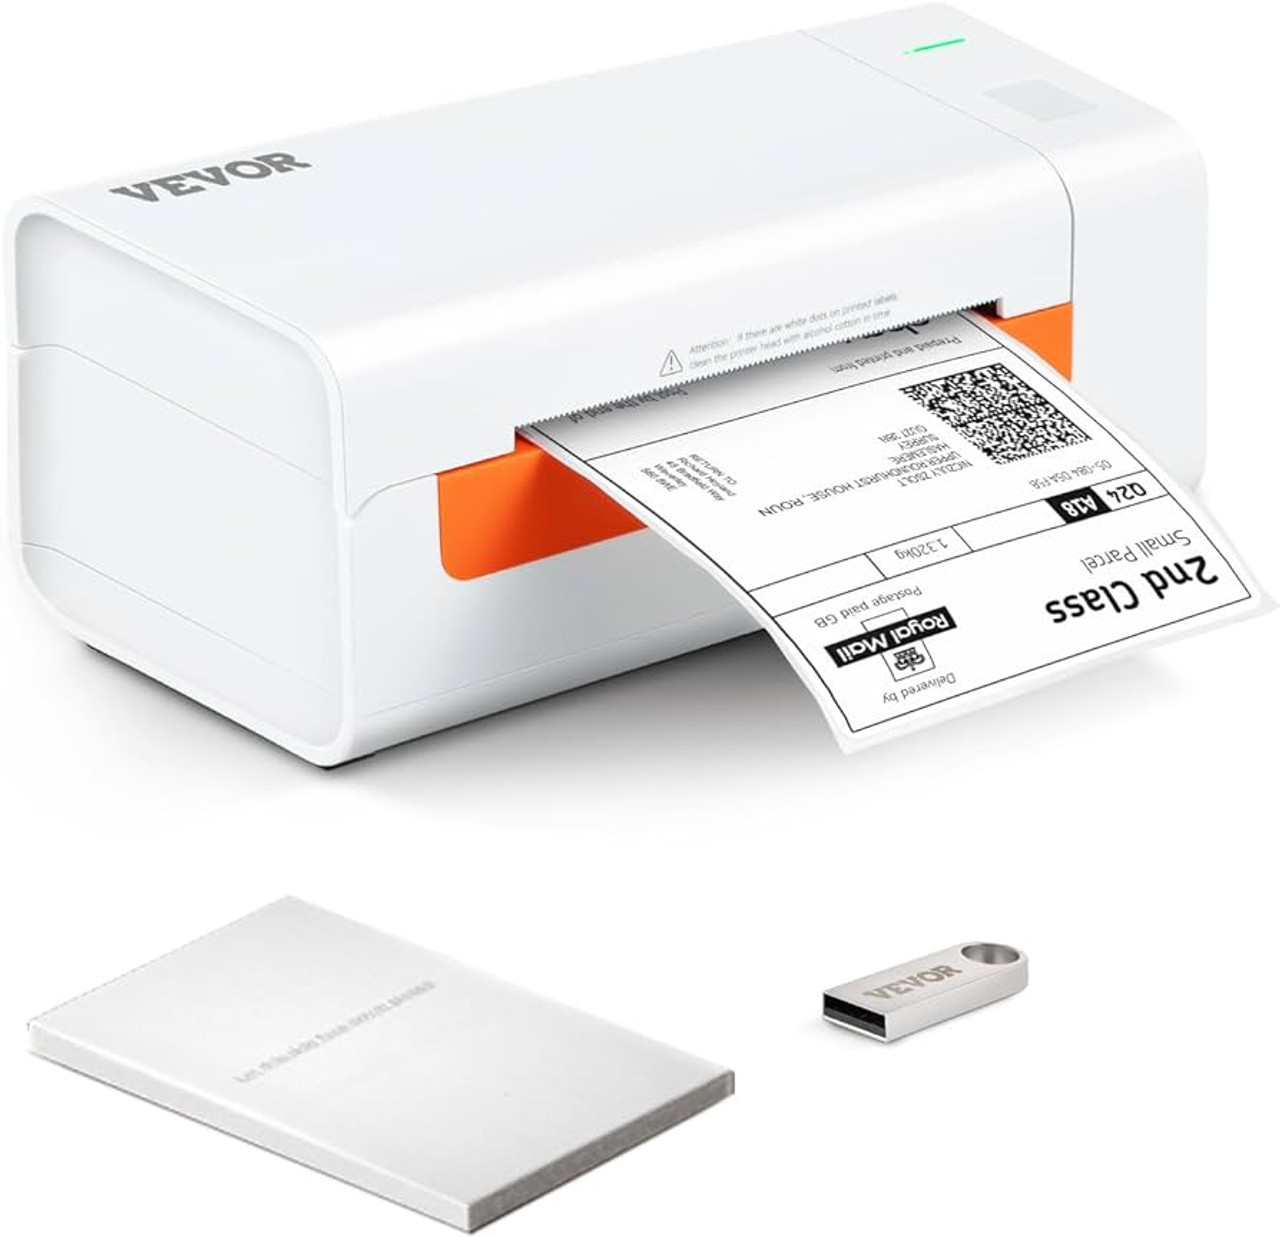 Thermal Label Printer, Shipping Label Printer for 4" x 6" Shipping Labels, USB Connection & Automatic Label Recognition, Support Windows/MacOS/Linux,